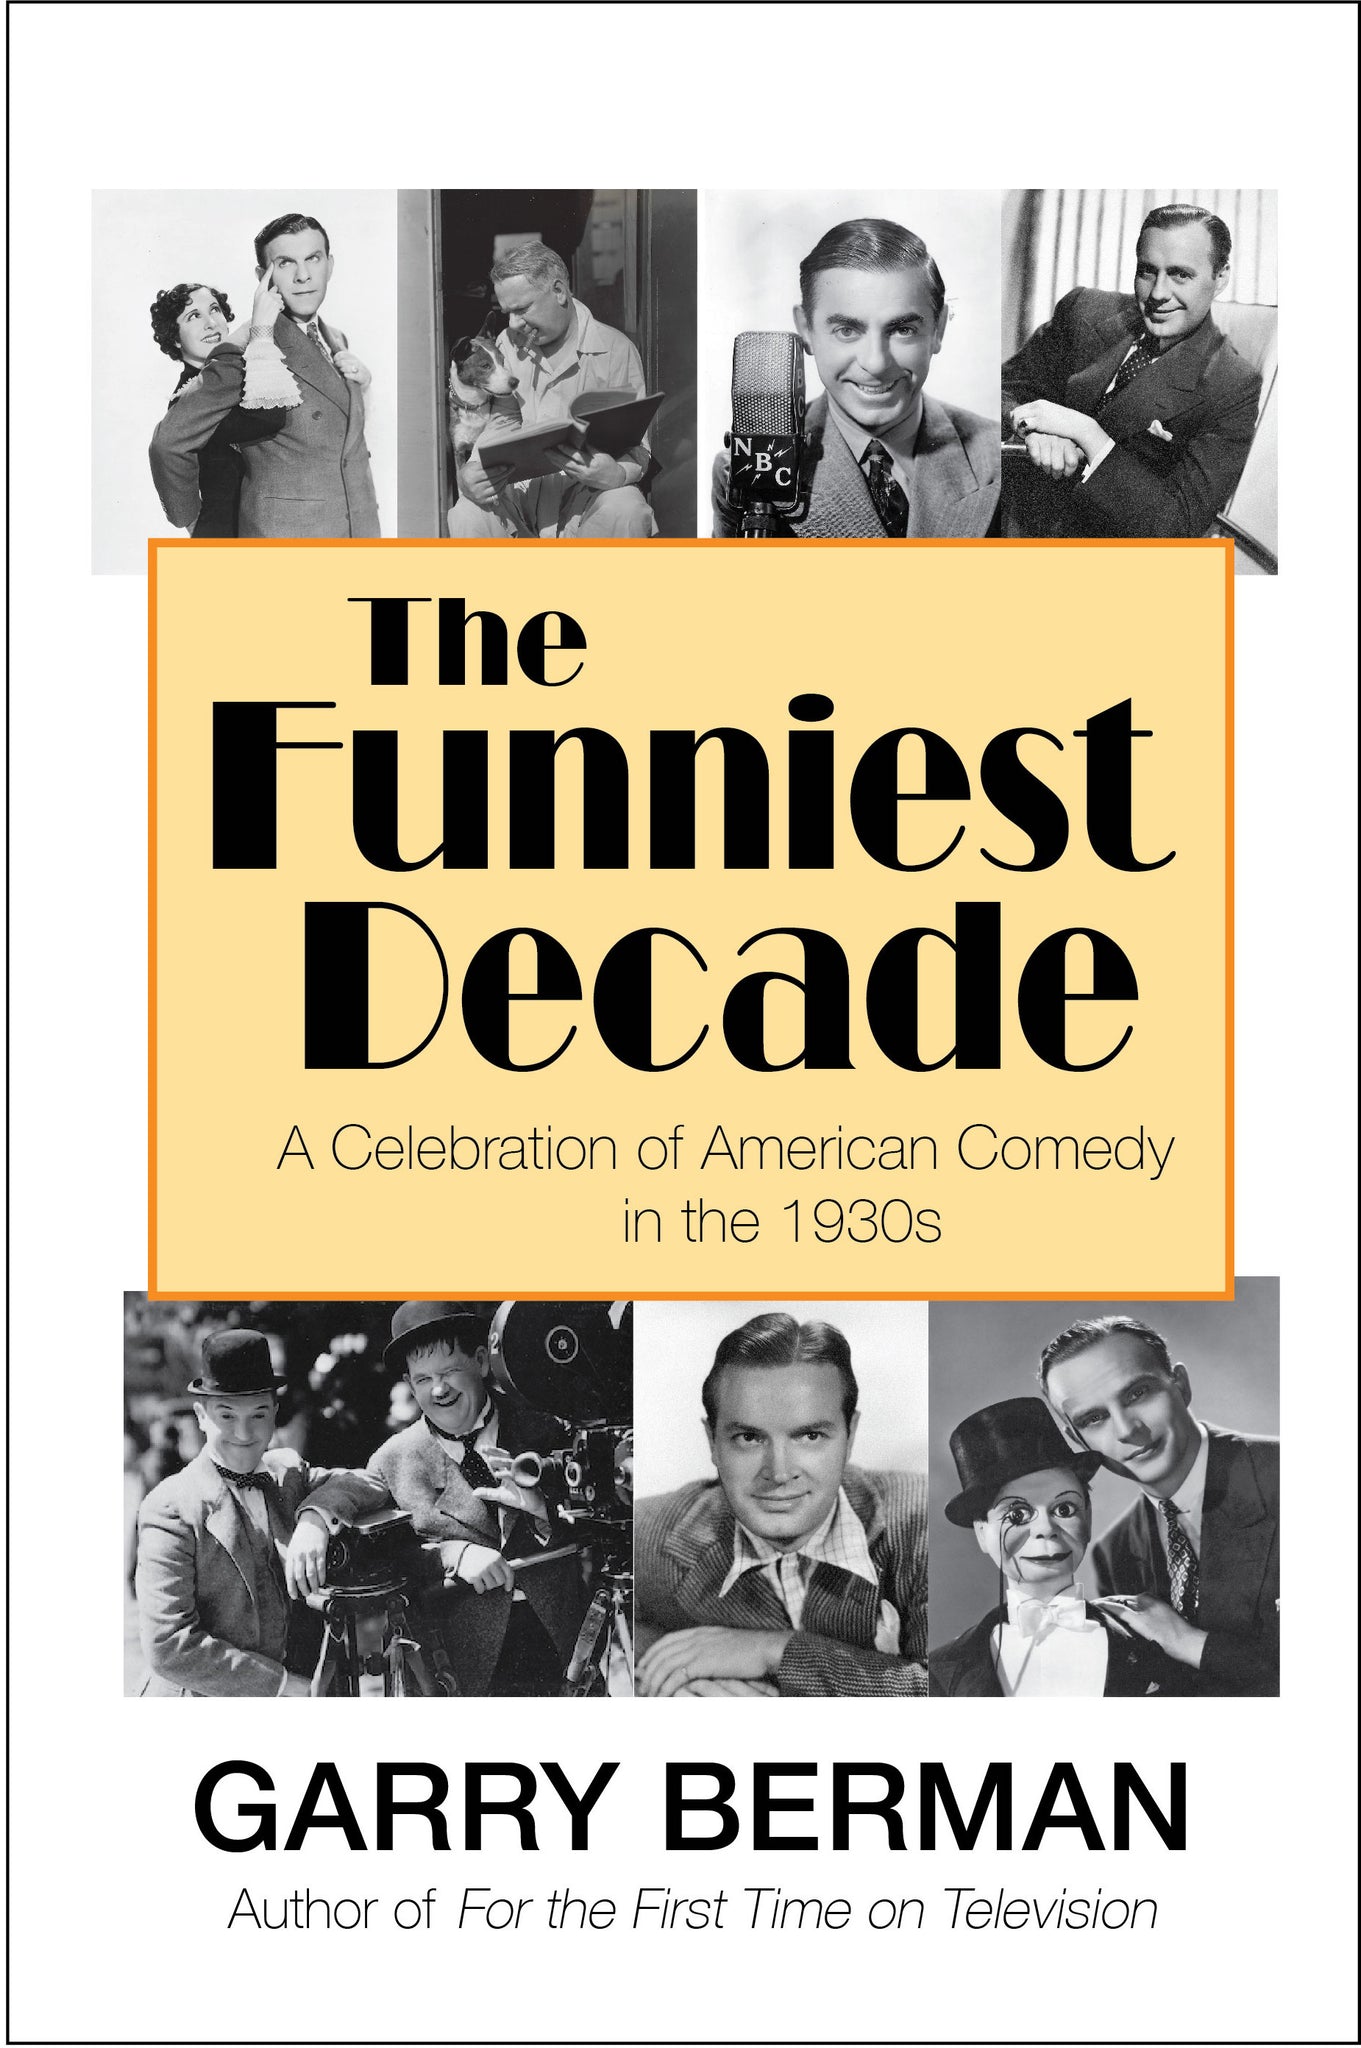 The Funniest Decade: A Celebration of American Comedy in the 1930s (ebook)